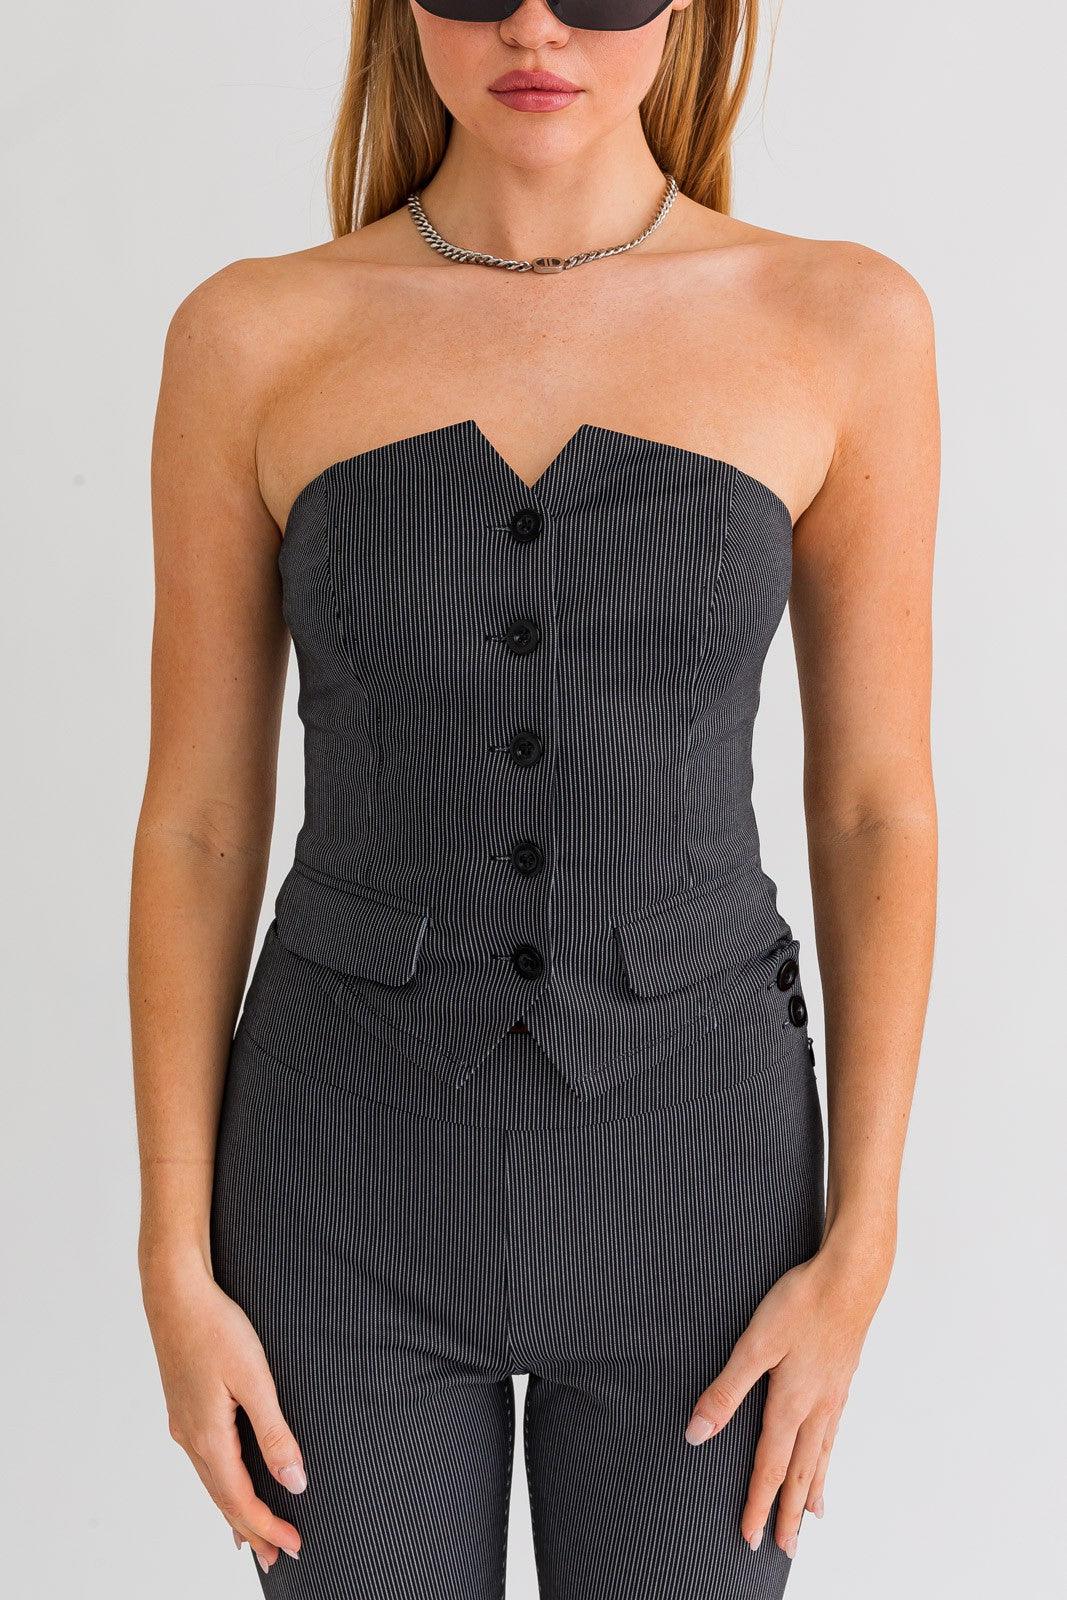 pinstripe button front bustier top - RK Collections Boutique